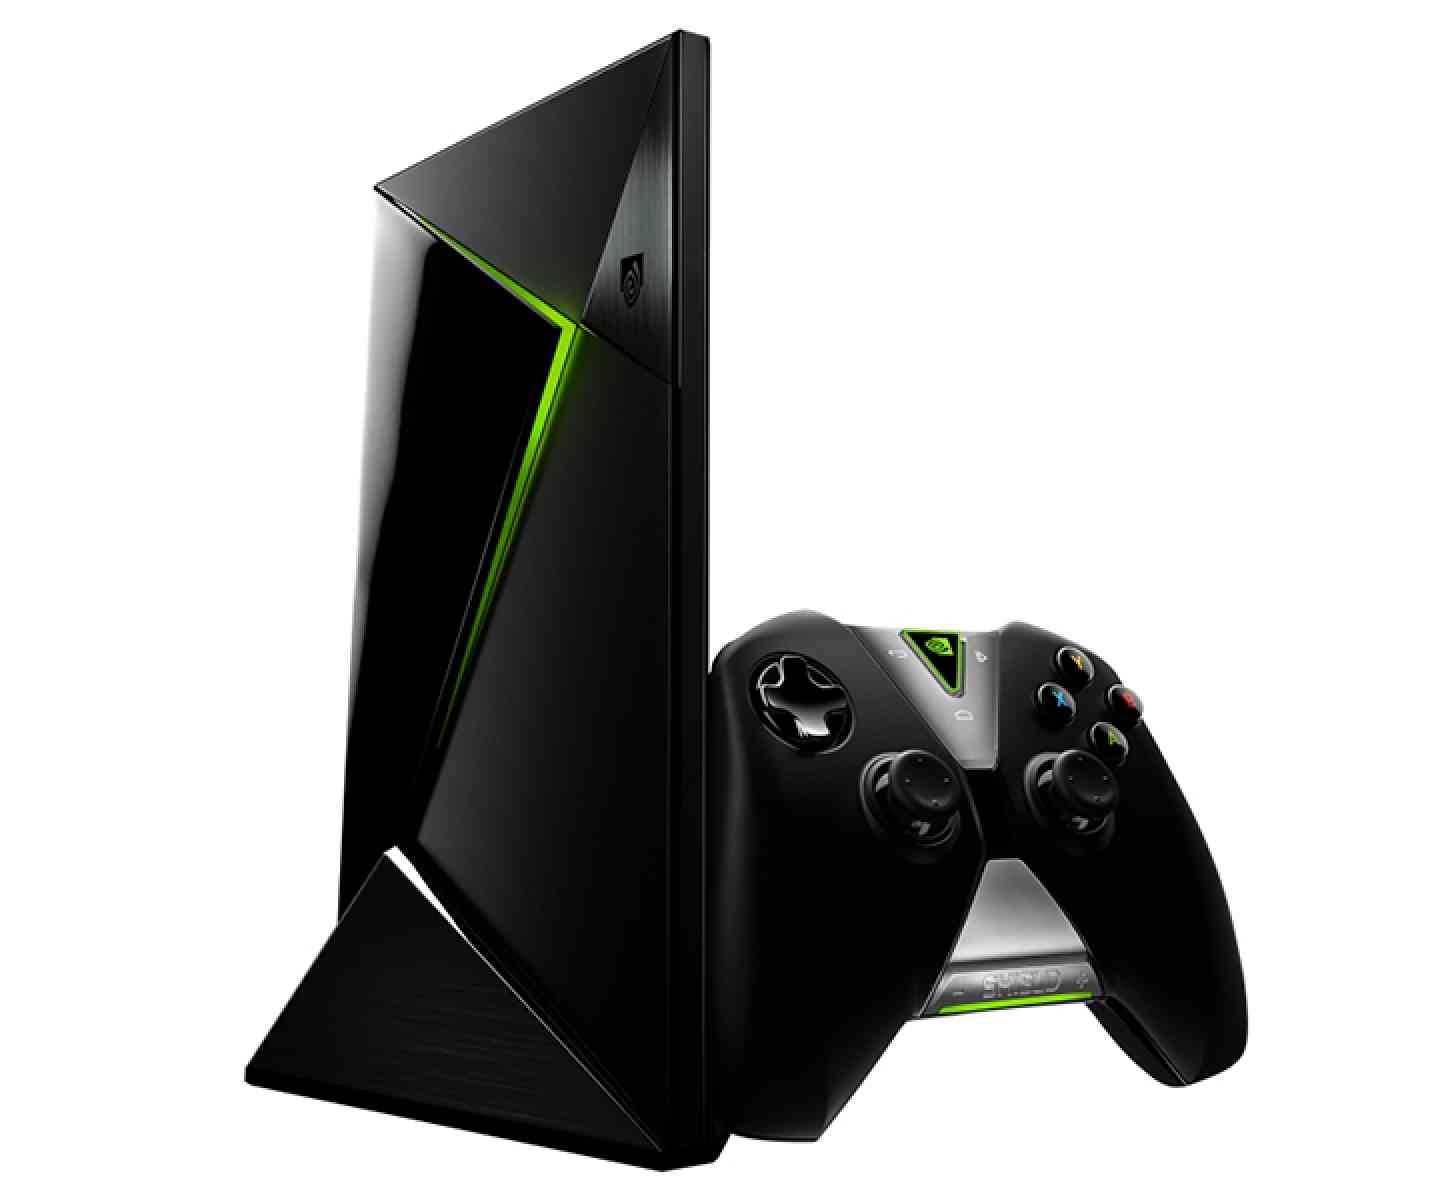 NVIDIA SHIELD Android TV official